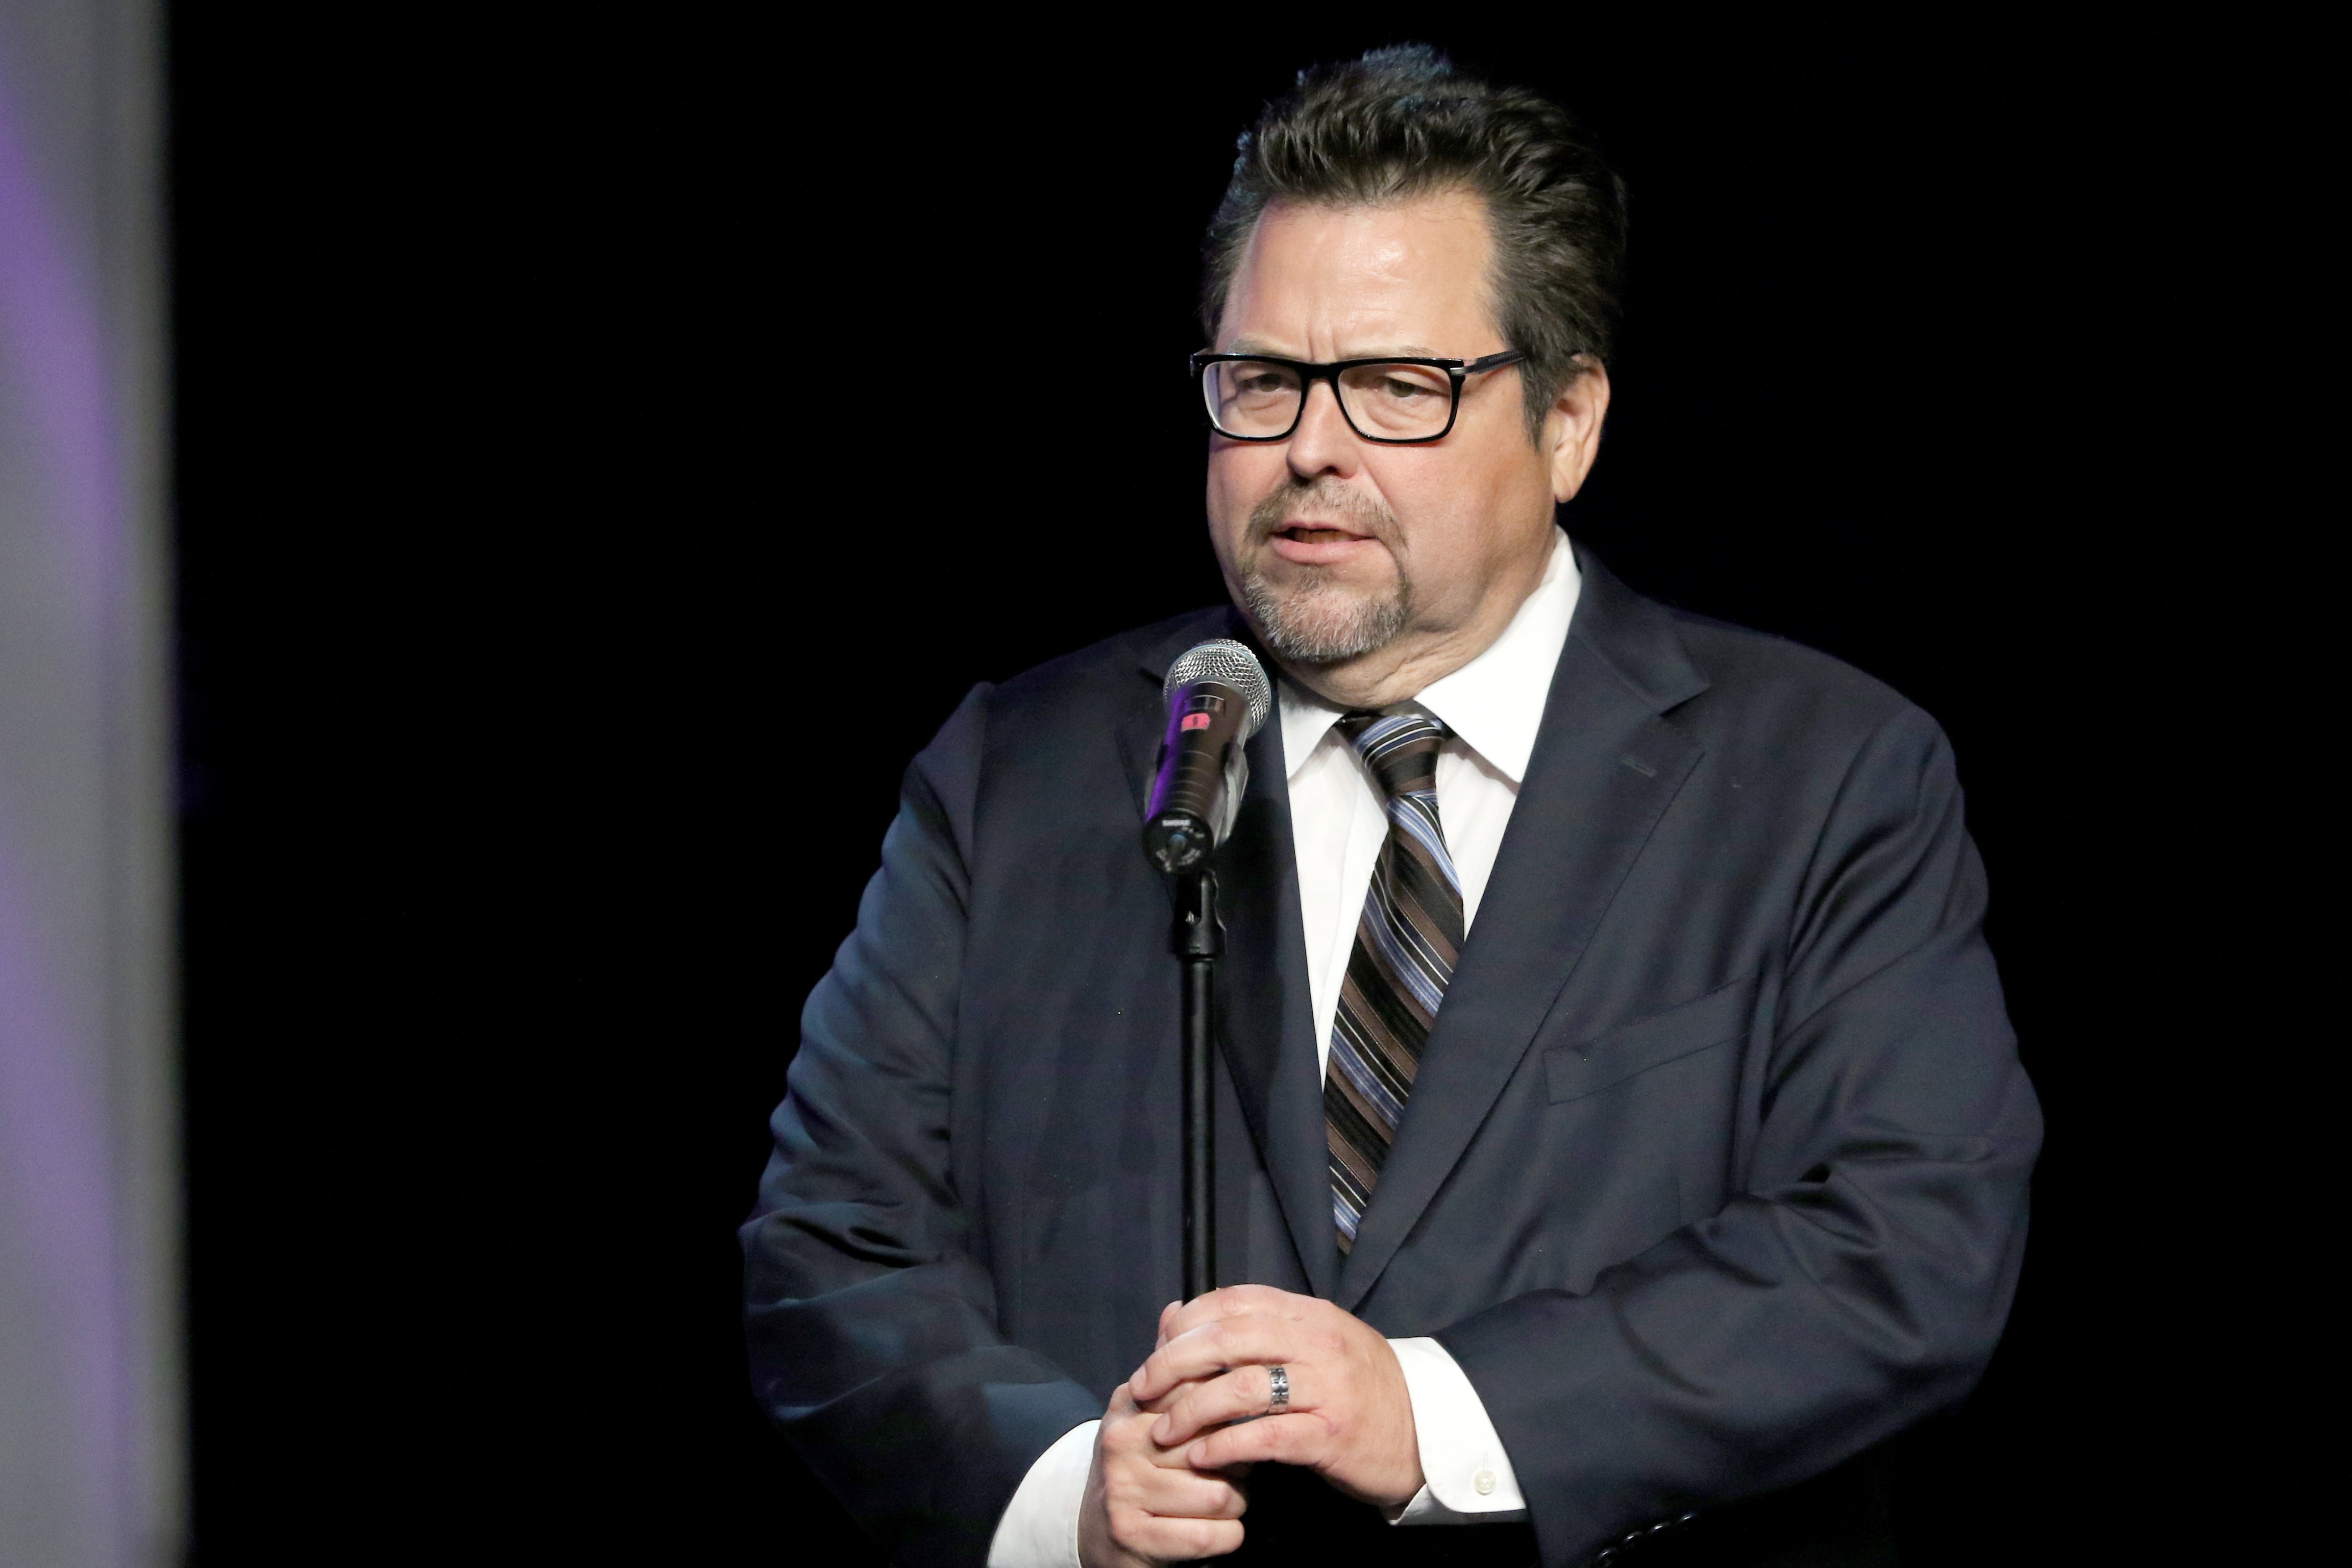 HOLLYWOOD, CA - OCTOBER 11: Actor Rick Najera speaks onstage during The Los Angeles Times and Hoy 2015 Latinos de Hoy Awards at Dolby Theatre on October 11, 2015 in Hollywood, California. (Photo by JC Olivera/Getty Images for Latinos de Hoy Awards) (JC Olivera—Getty Images for Latinos de Hoy Awards)